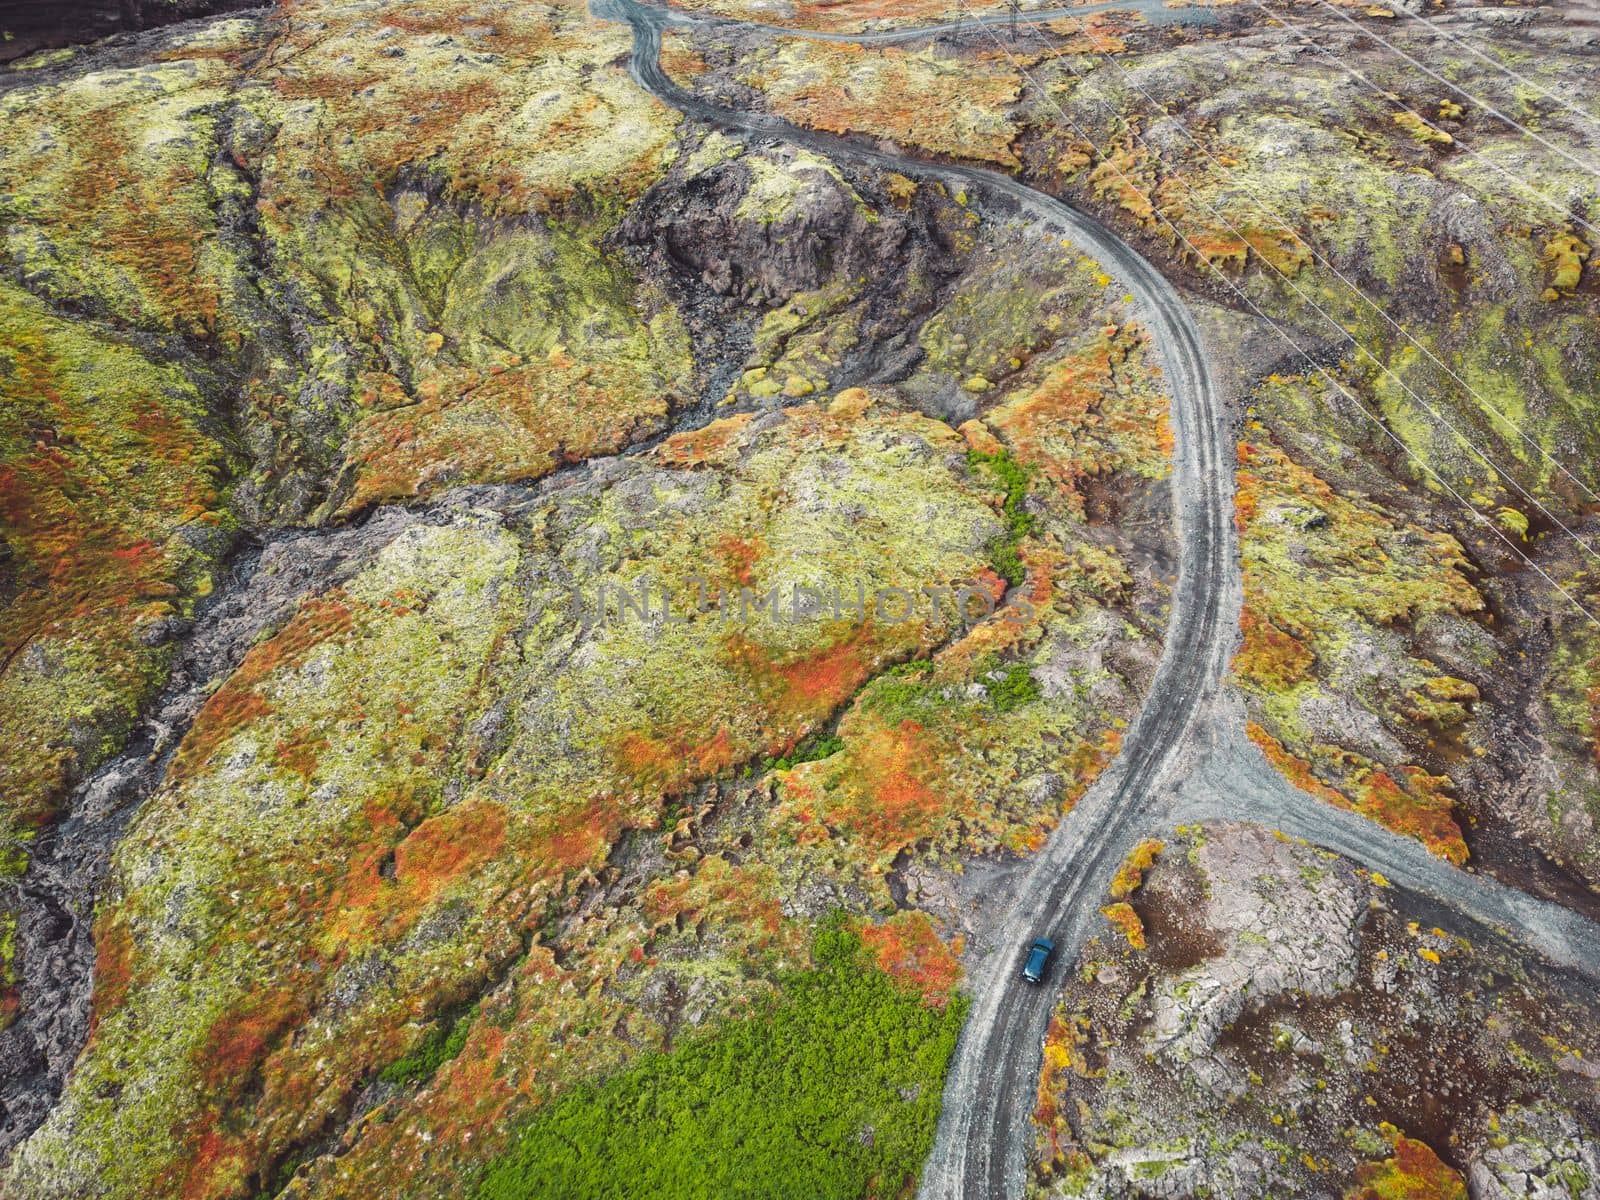 Icelandic highlands, F roads, river crossing. Remote dirt road somewhere in Iceland mainland, surrounded by vibrant green bushes and volcanic lands. A car driving alone on the gravel road.